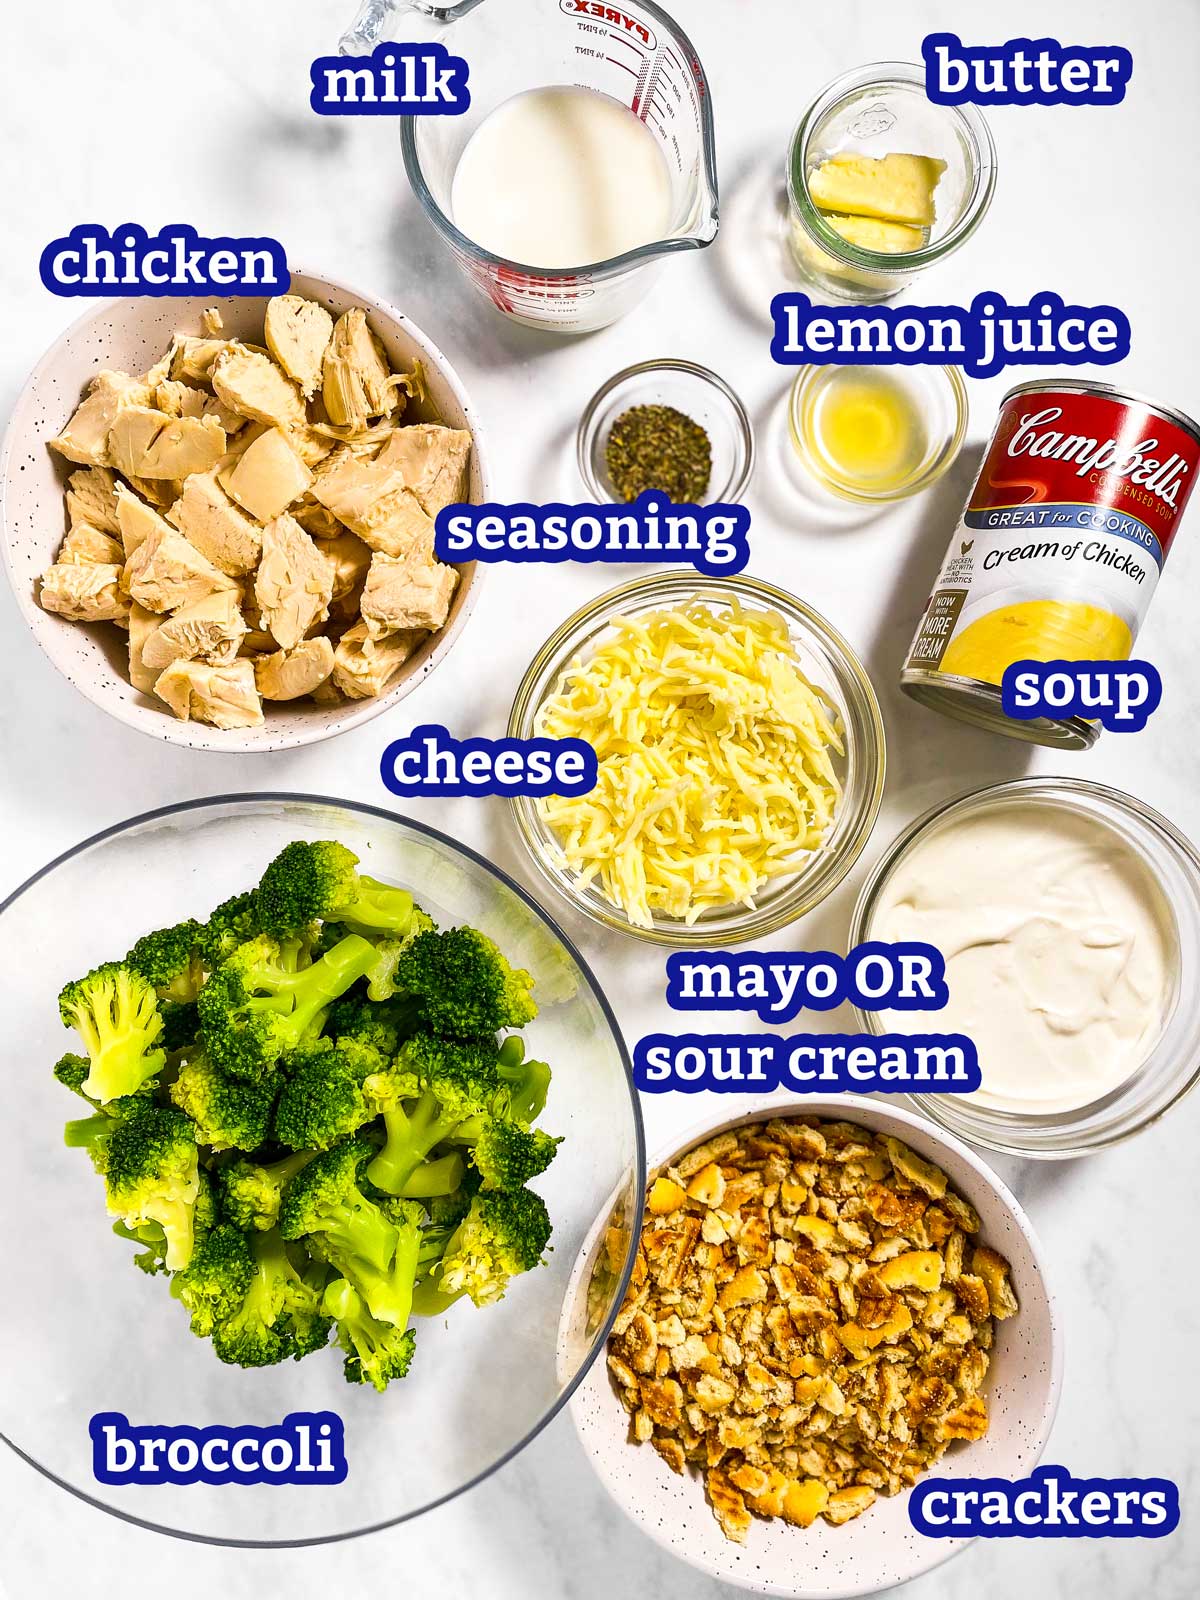 ingredients for ritz chicken broccoli casserole with text labels